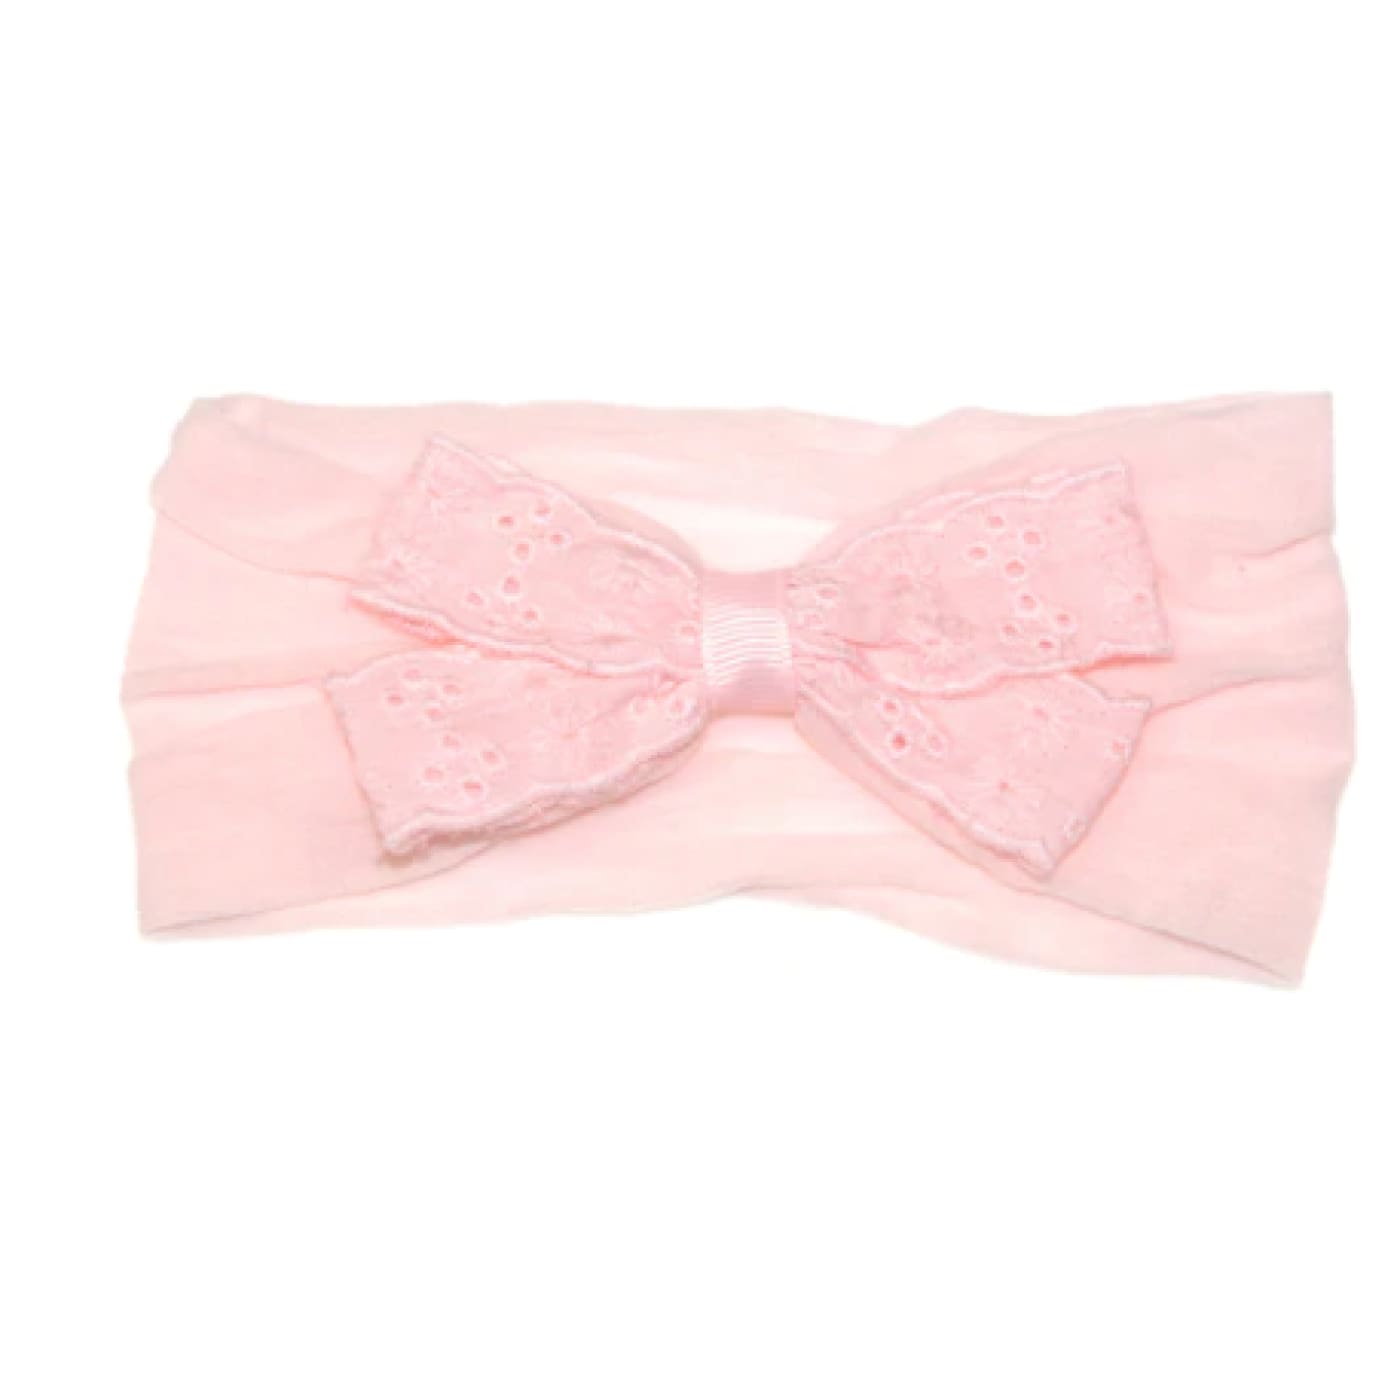 Goody Gumdrops Baby Broderie Anglaise Bow Headband - Pink - Pink - BABY & TODDLER CLOTHING - HEADBANDS/HAIR CLIPS